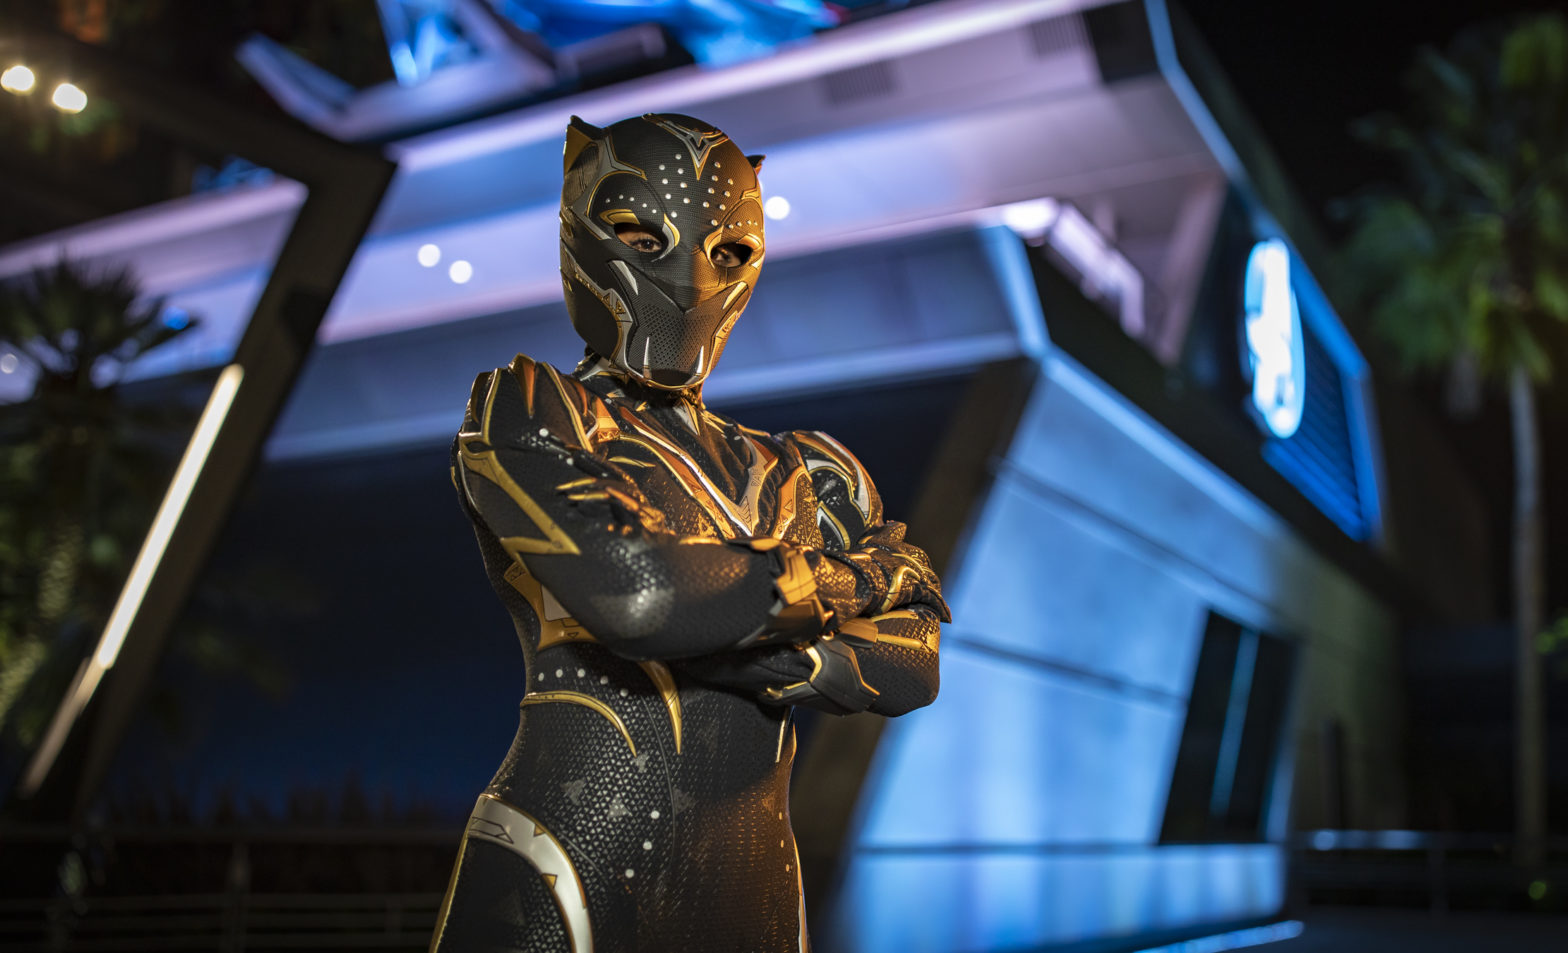 Want To Feel Closer To Wakanda? Disneyland’s Latest Additions Celebrate Marvel’s Black Panther: Wakanda Forever In The Coolest Ways